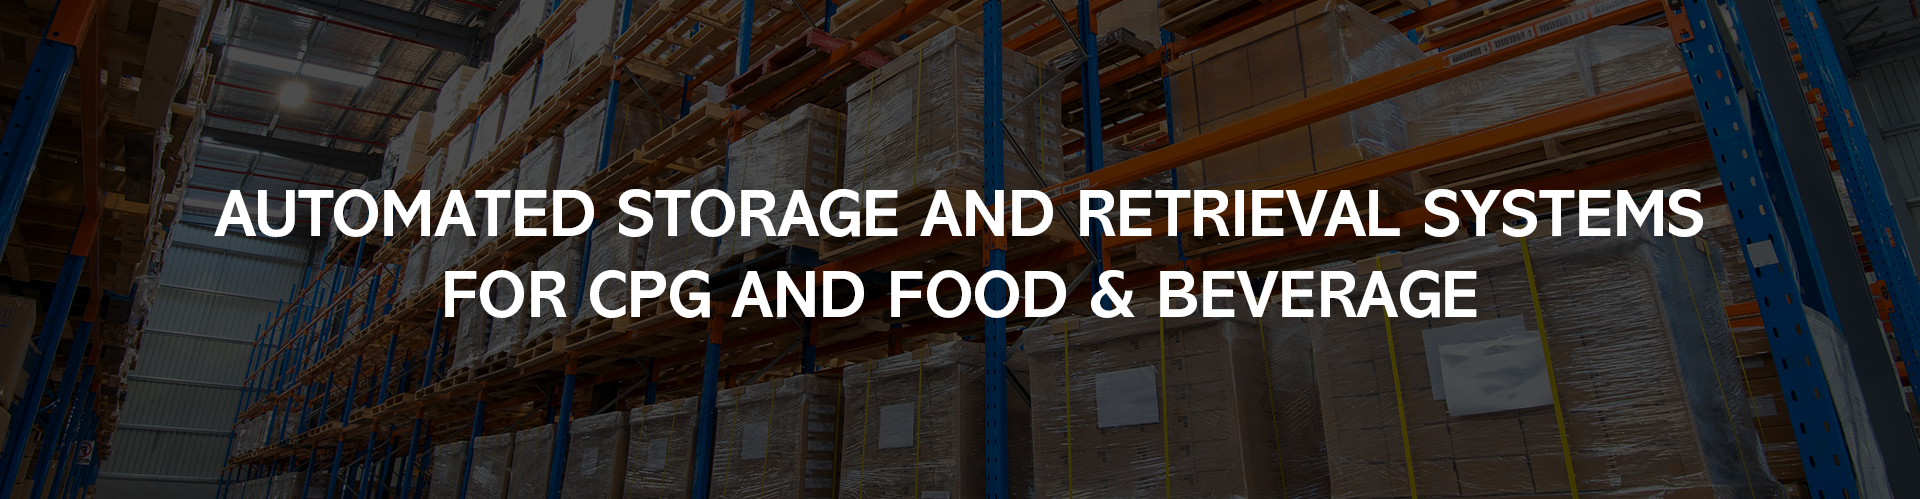 Automated Storage and Retrieval Systems for CPG and Food & Beverage